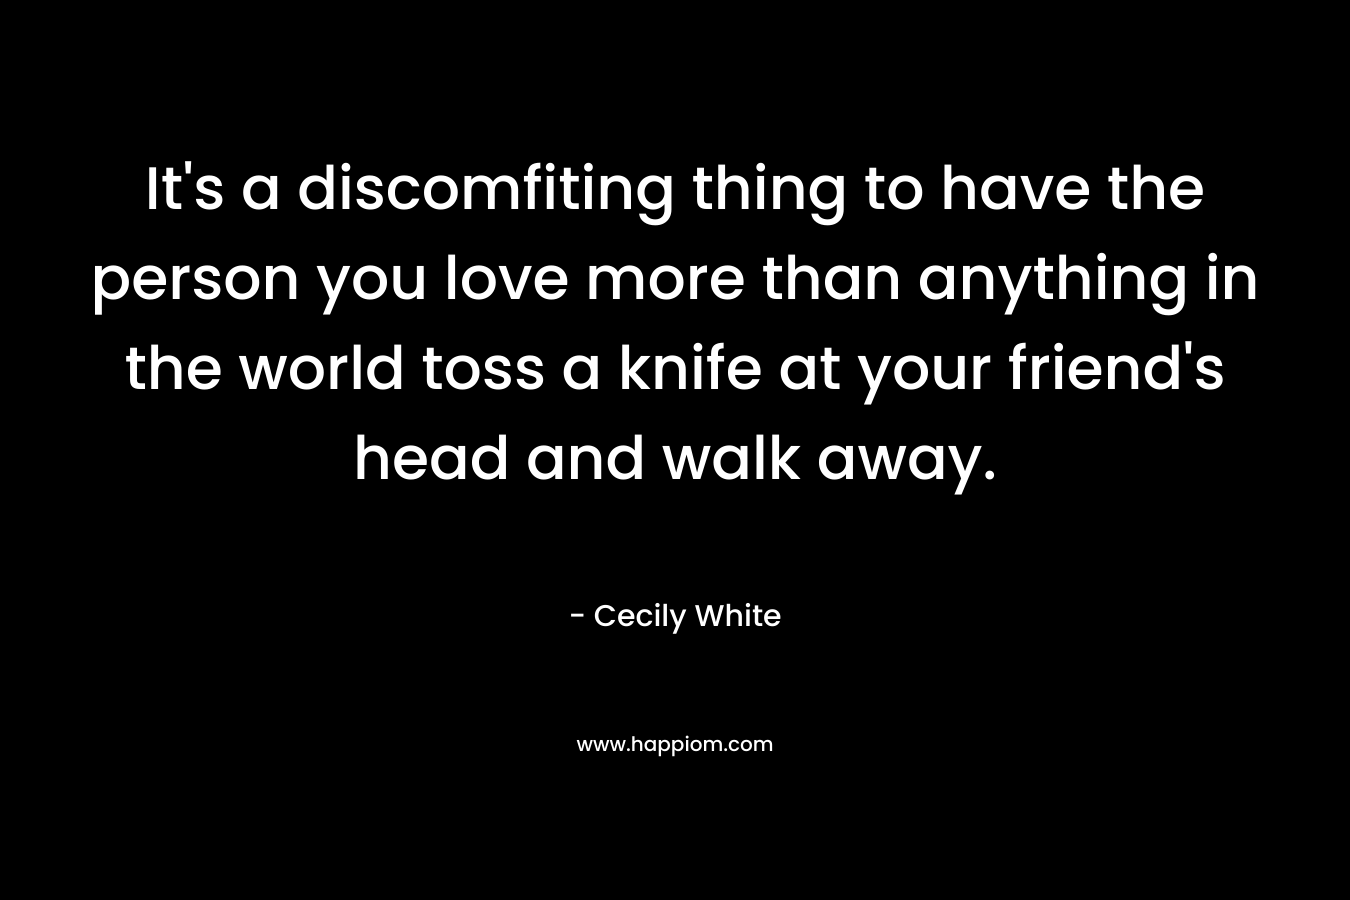 It's a discomfiting thing to have the person you love more than anything in the world toss a knife at your friend's head and walk away.